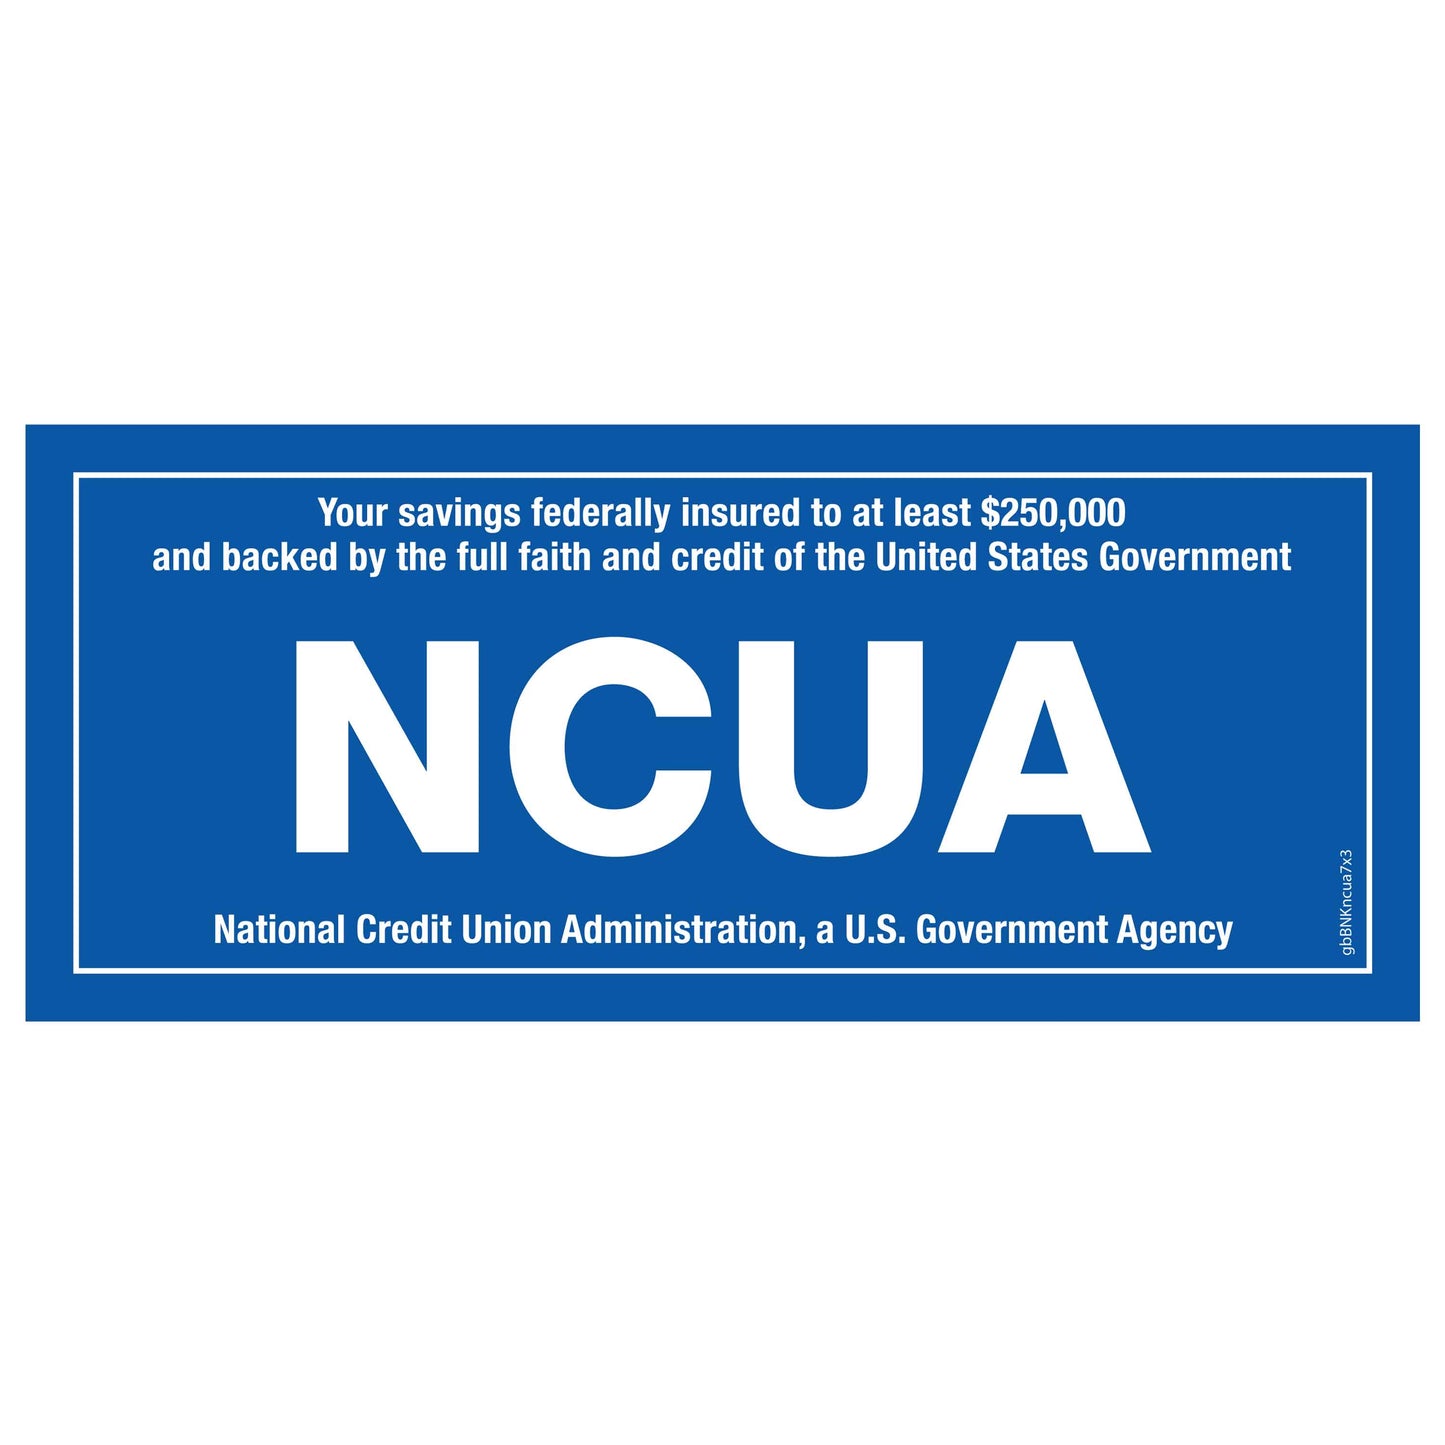 NCUA Credit Union Decal. 7 inches by 3 inches in size.